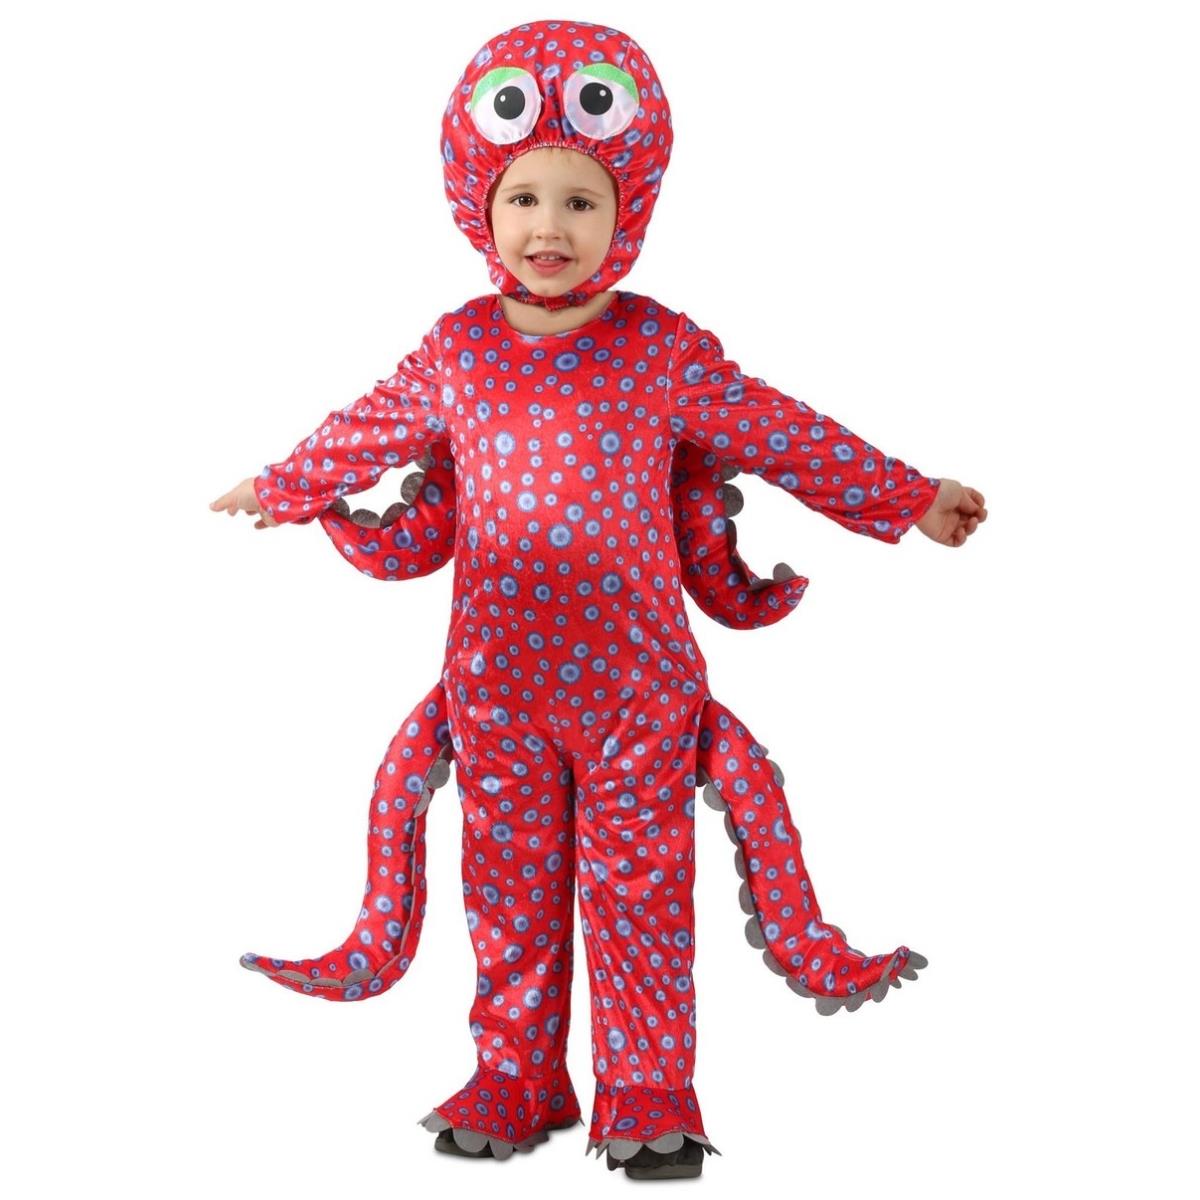 Picture of Rubies  413933 2 Toddler Oliver the Octopus Costume for Boys  18 Month